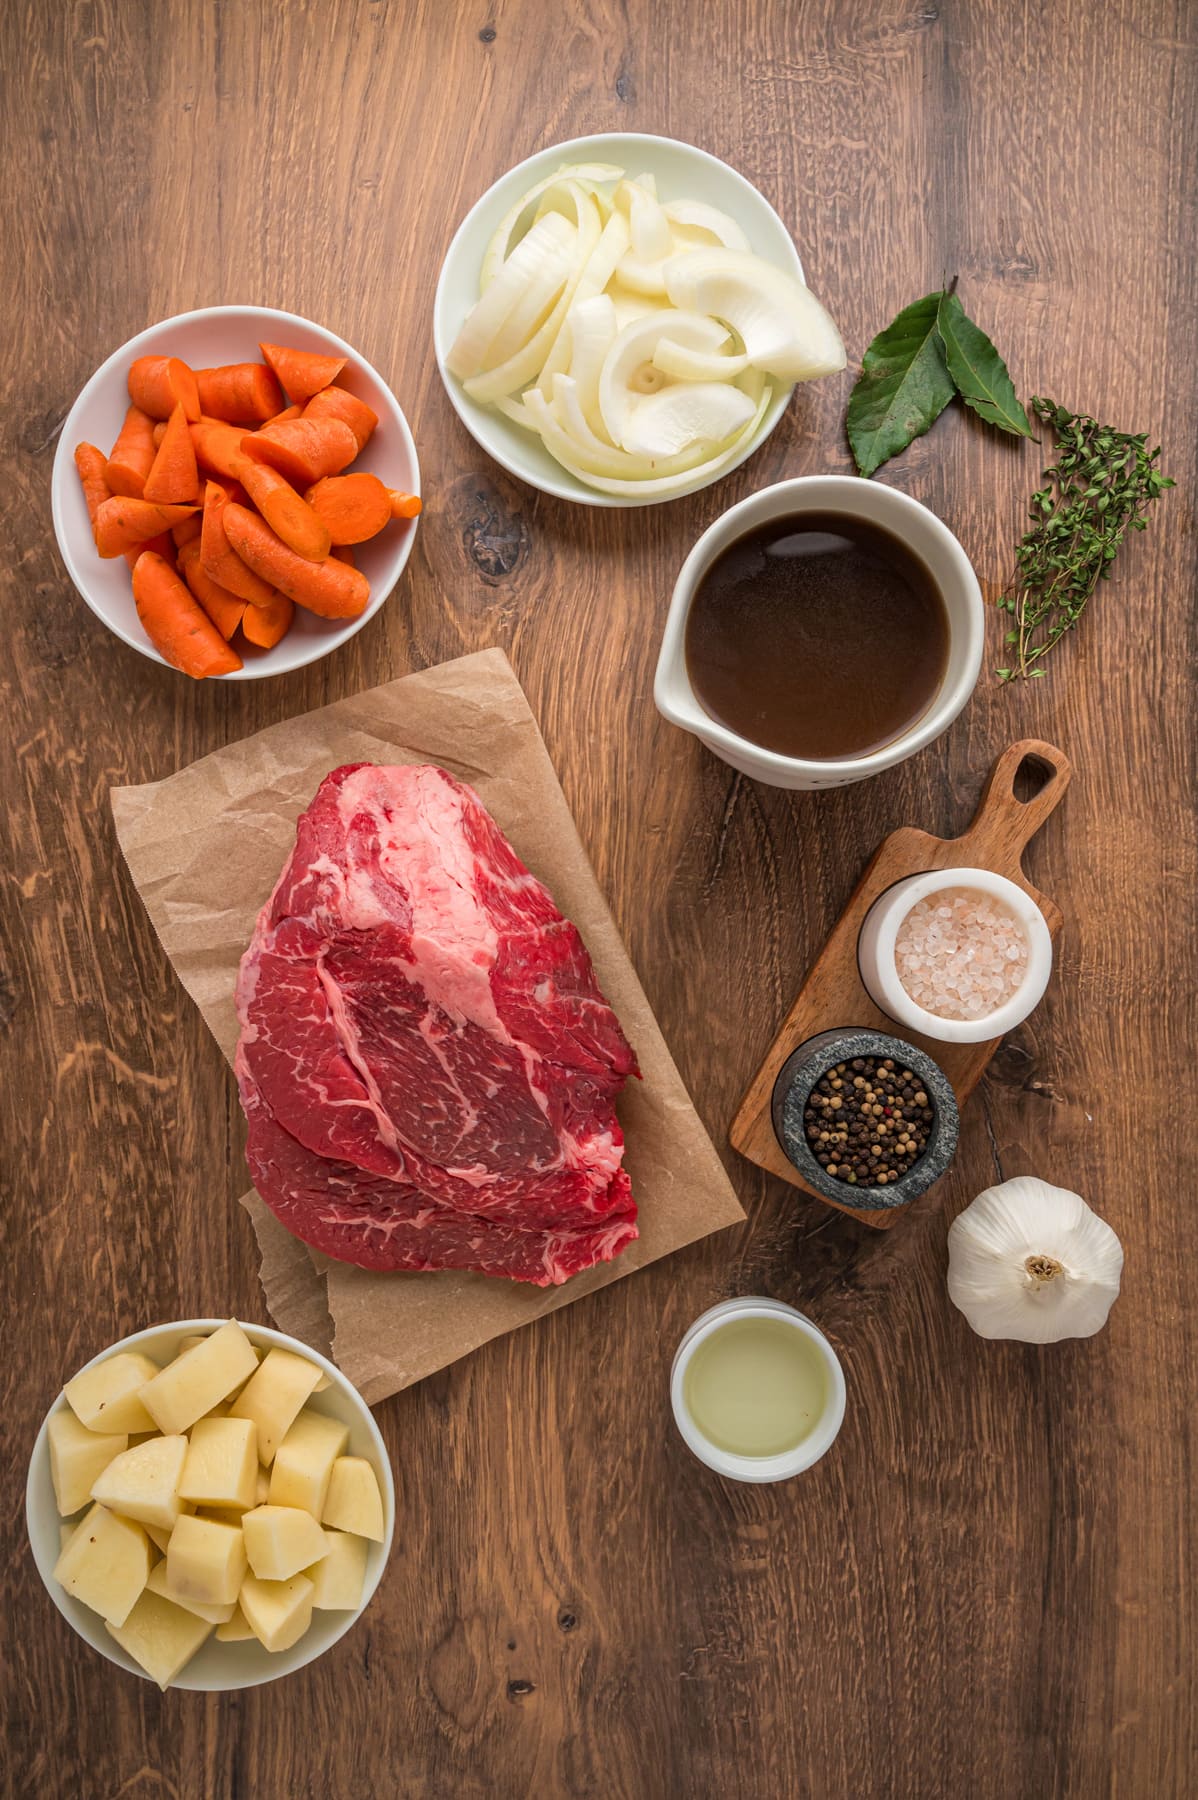 Ingredients to make pot roast in the slow cooker